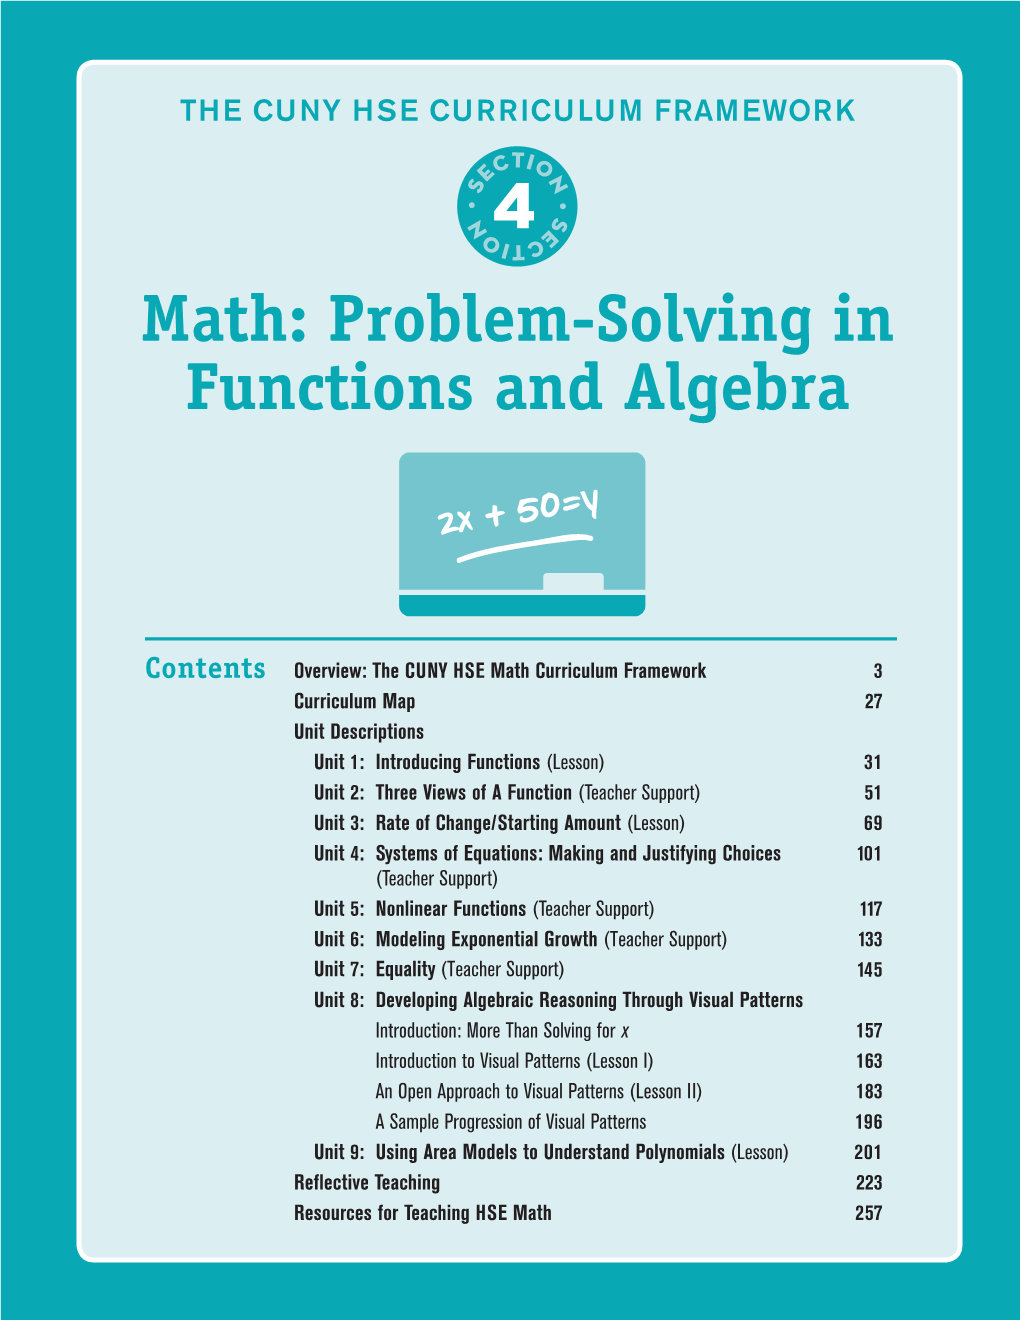 4 Math: Problem-Solving in Functions and Algebra